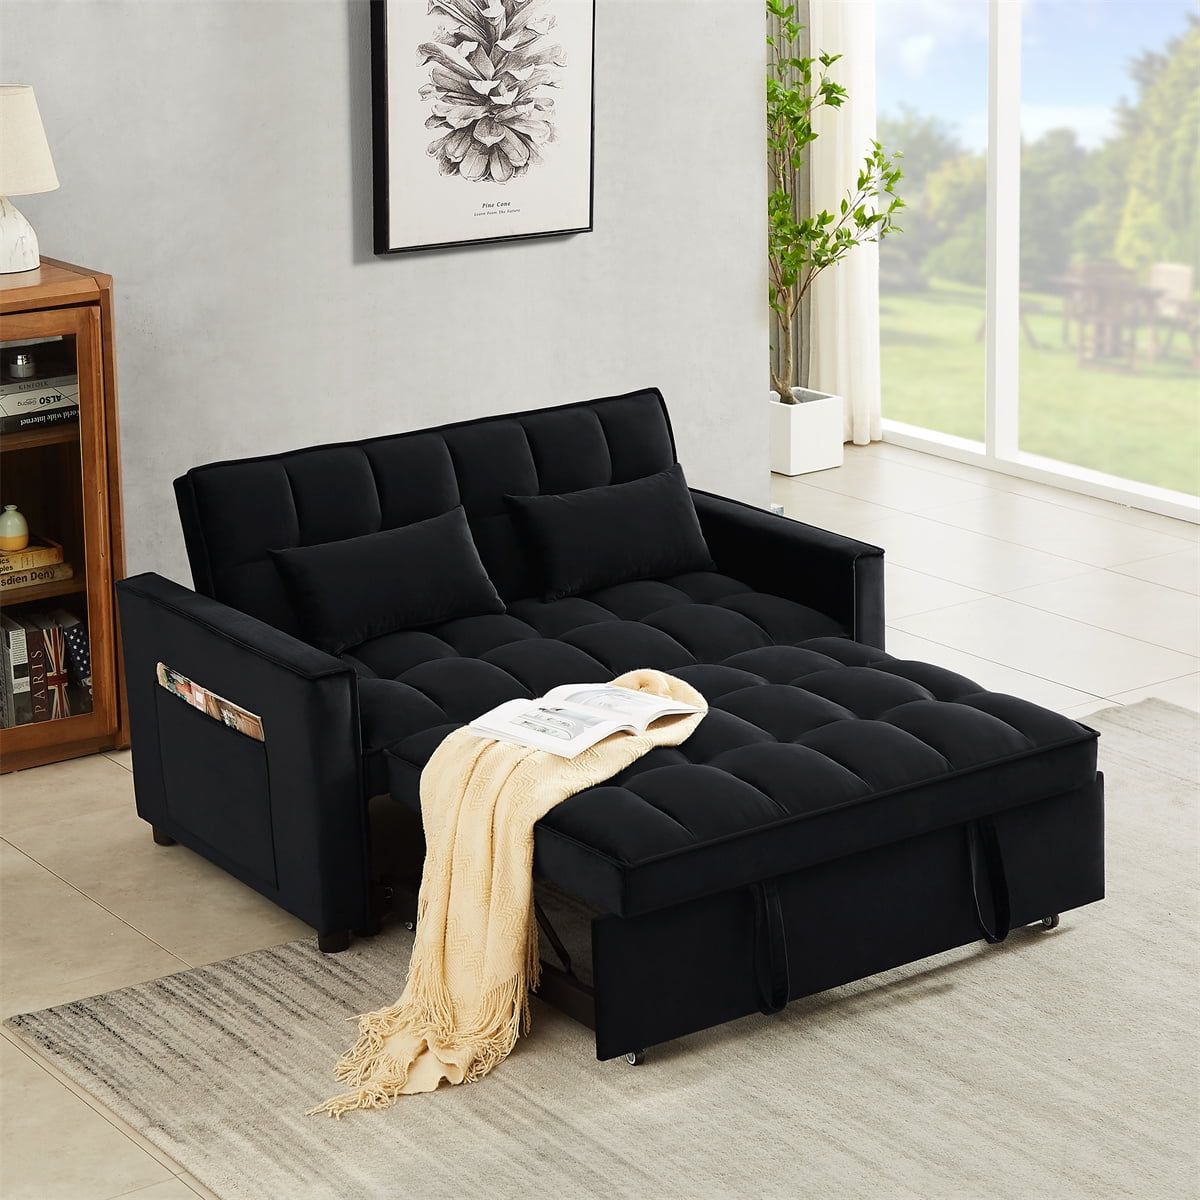 Convertible Sleeper Sofa Loveseat Sofa Bed Couch With Adjustable  Backrest,modern Velvet 2 Seater Sofa With Pull Out Bed,side Pocket And 2  Lumbar Pillows Lounge Chaise For Living Room Apartment,black – Walmart Intended For Black Velvet 2 Seater Sofa Beds (Photo 11 of 15)